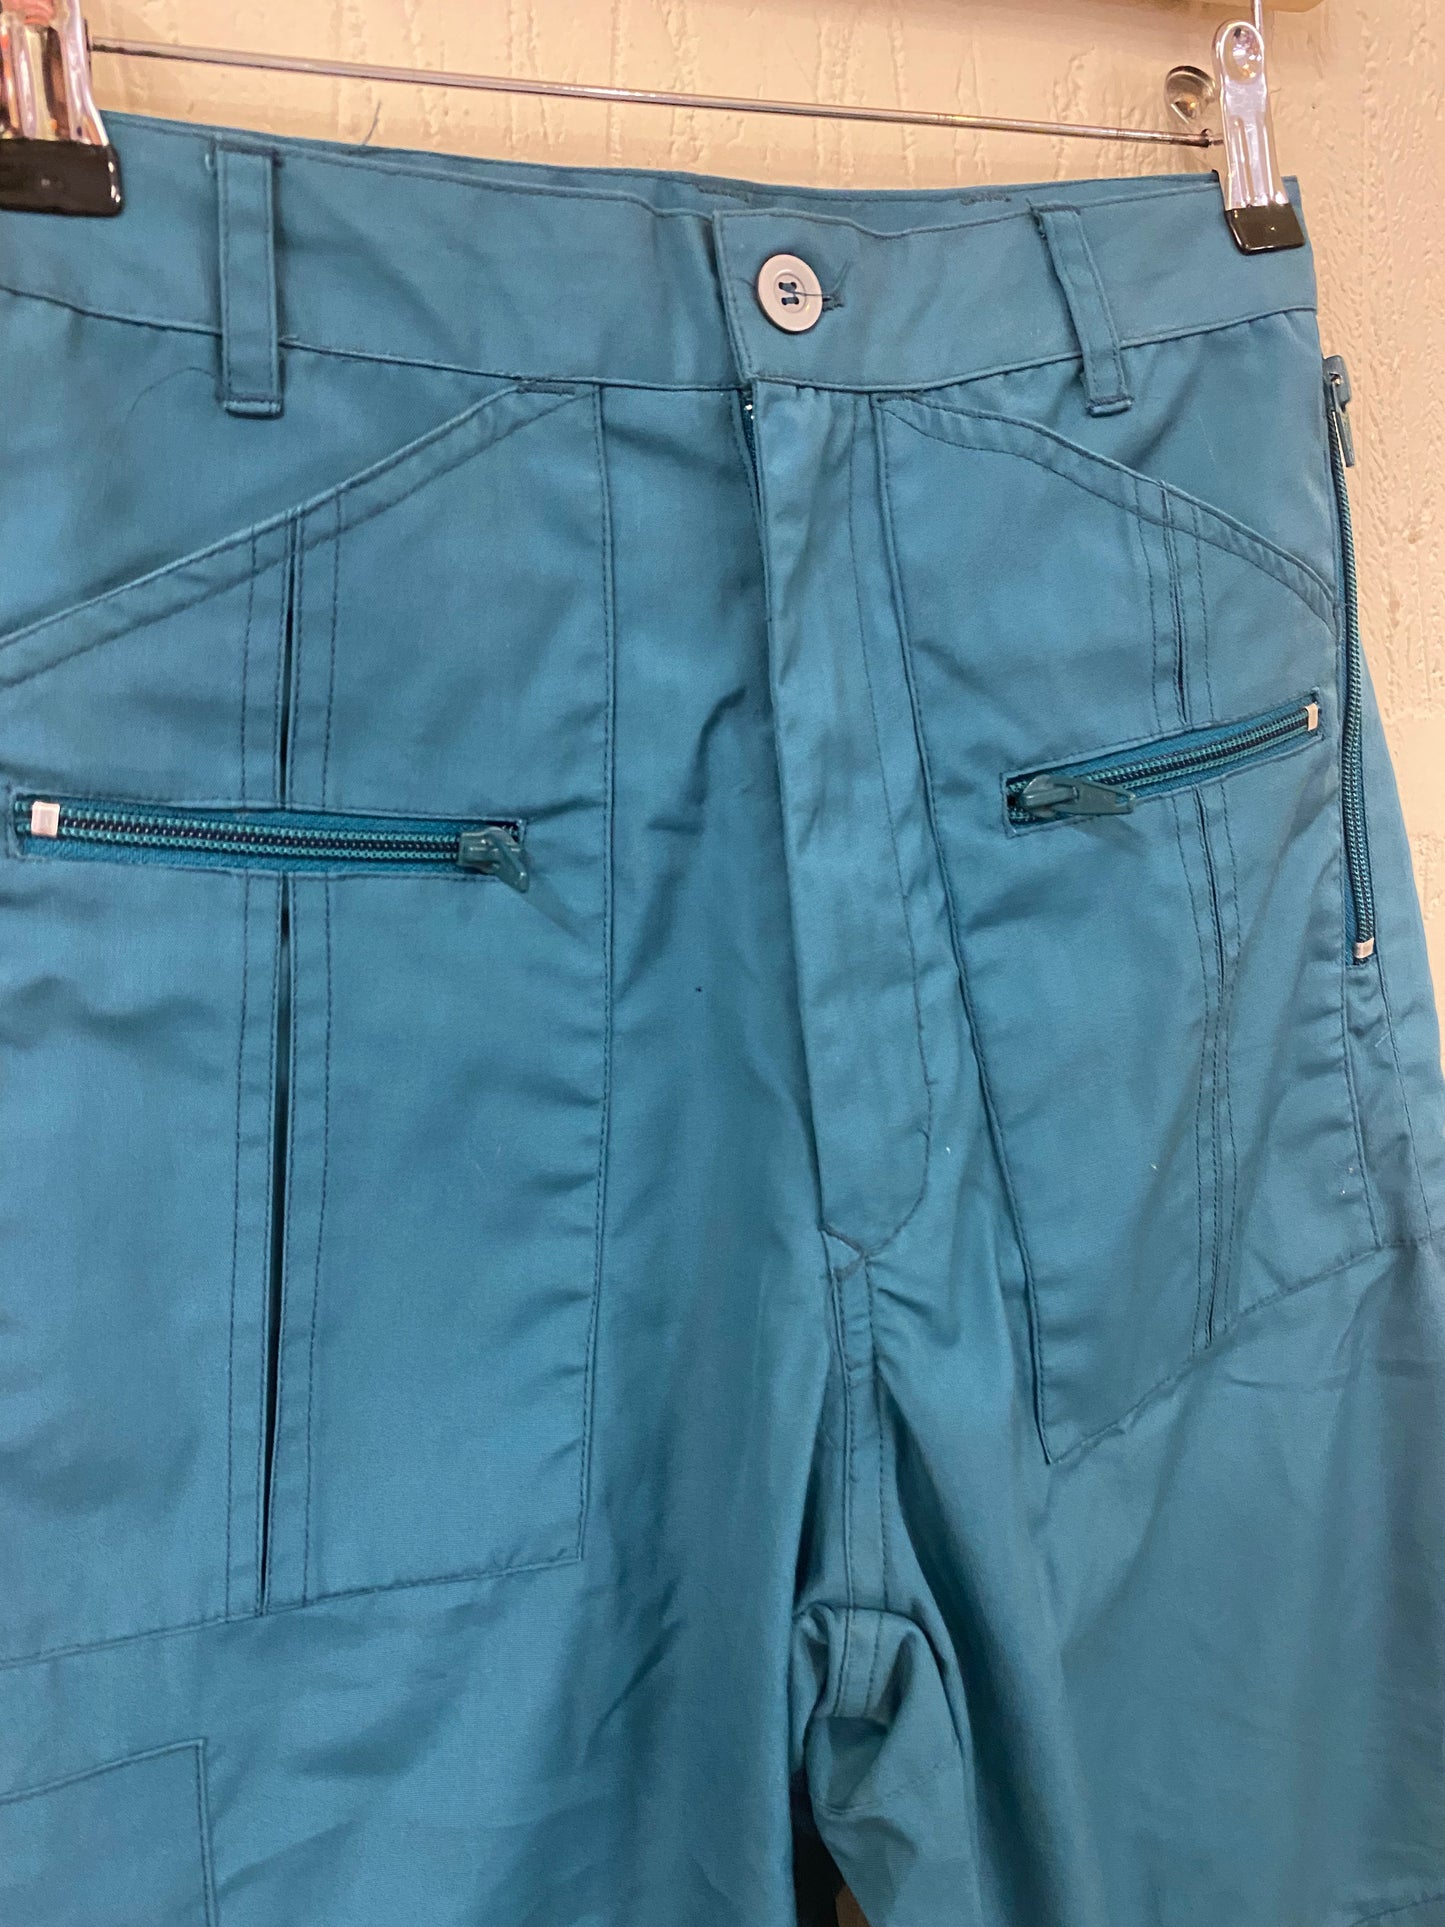 Vintage Teal  Hiking Trousers with Zips  Size 6-8